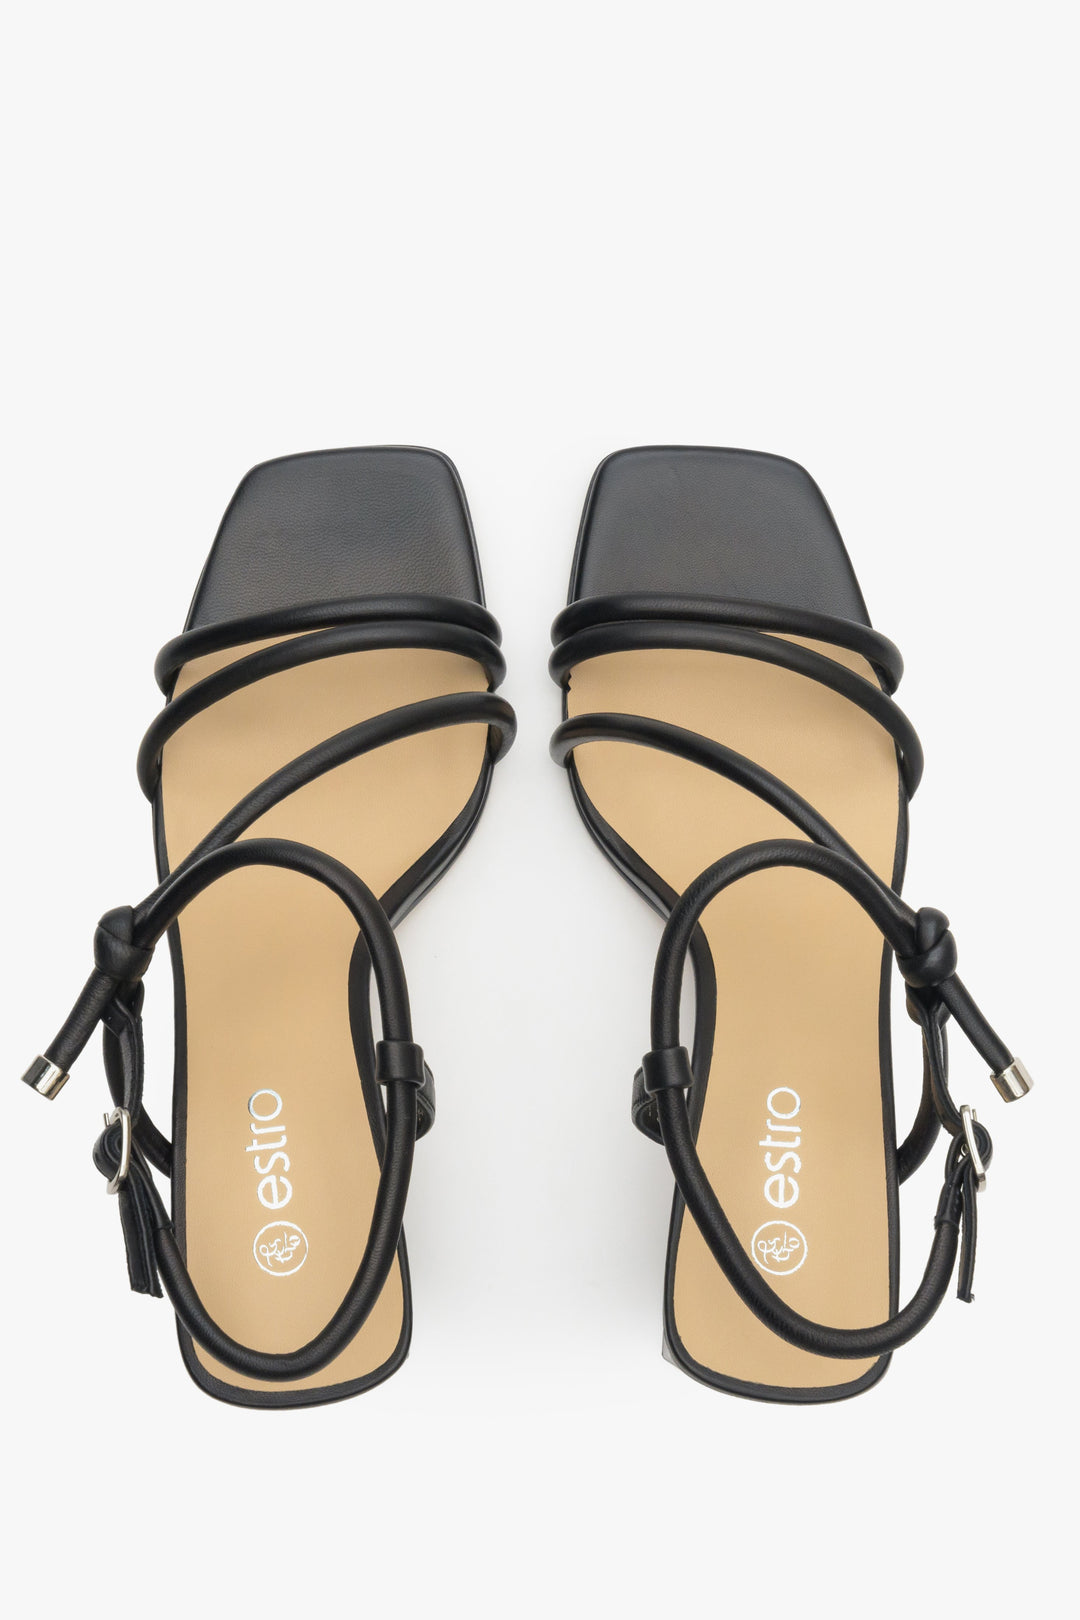 Women's strappy sandals in black on a block heel - presentation of the footwear from above.